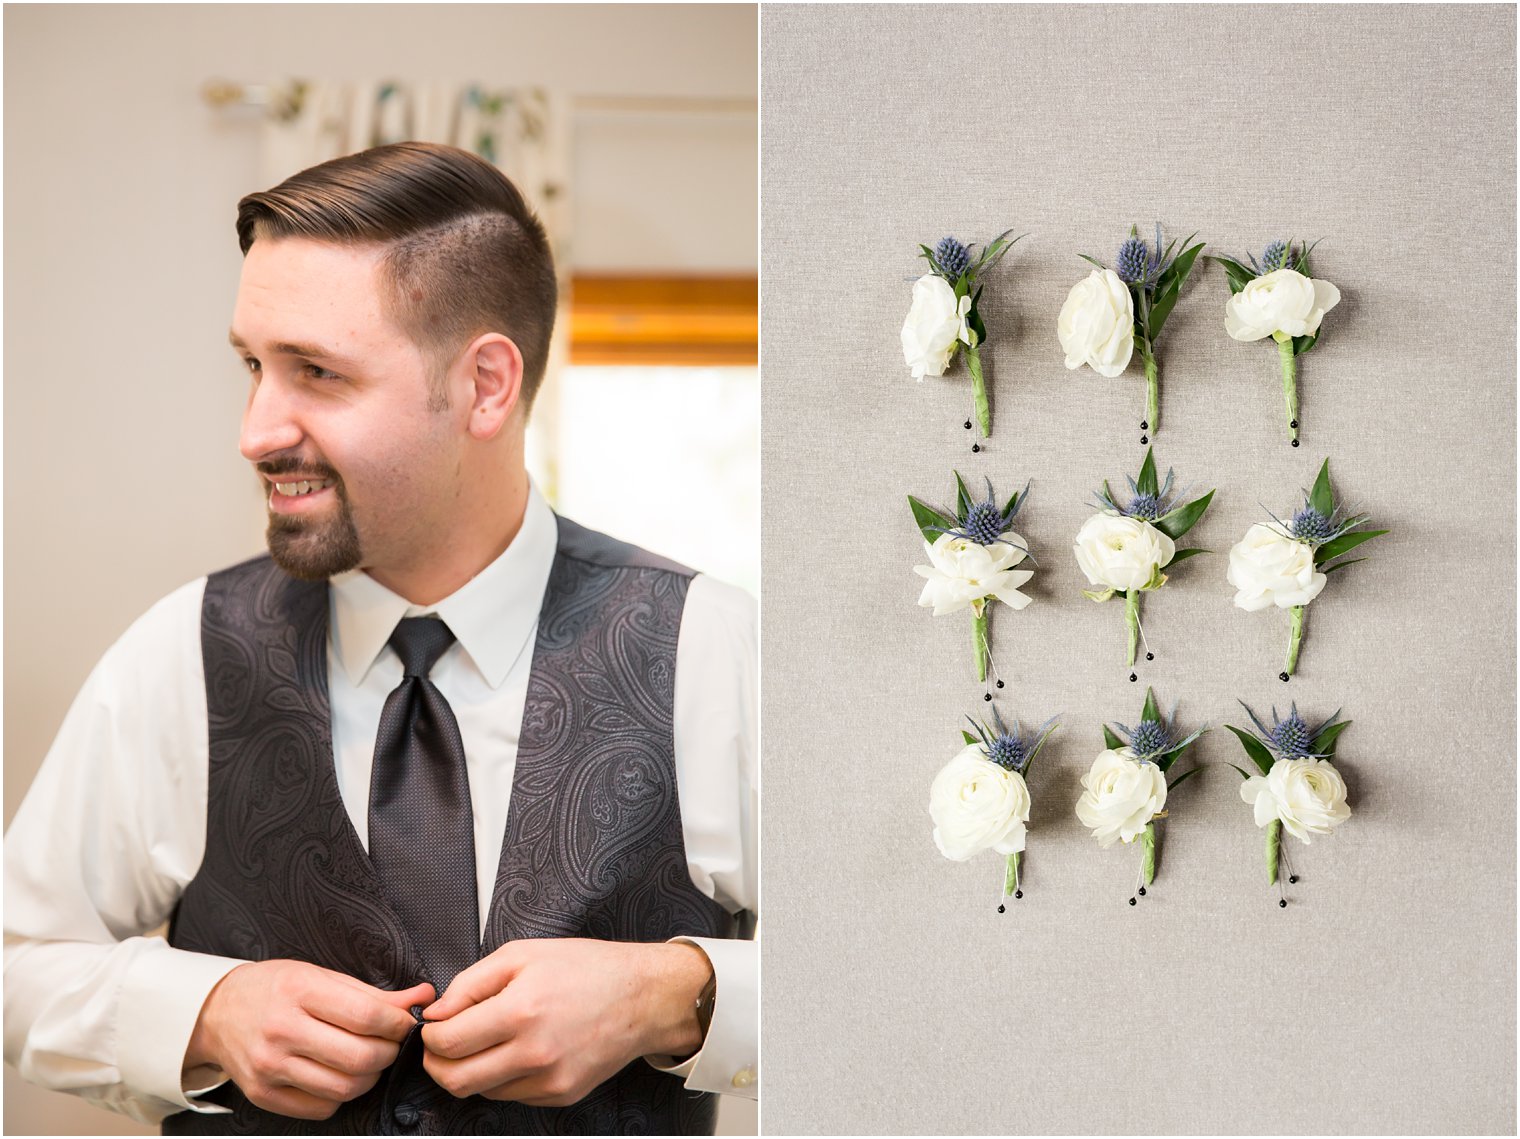 Groom and groomsman boutonnieres